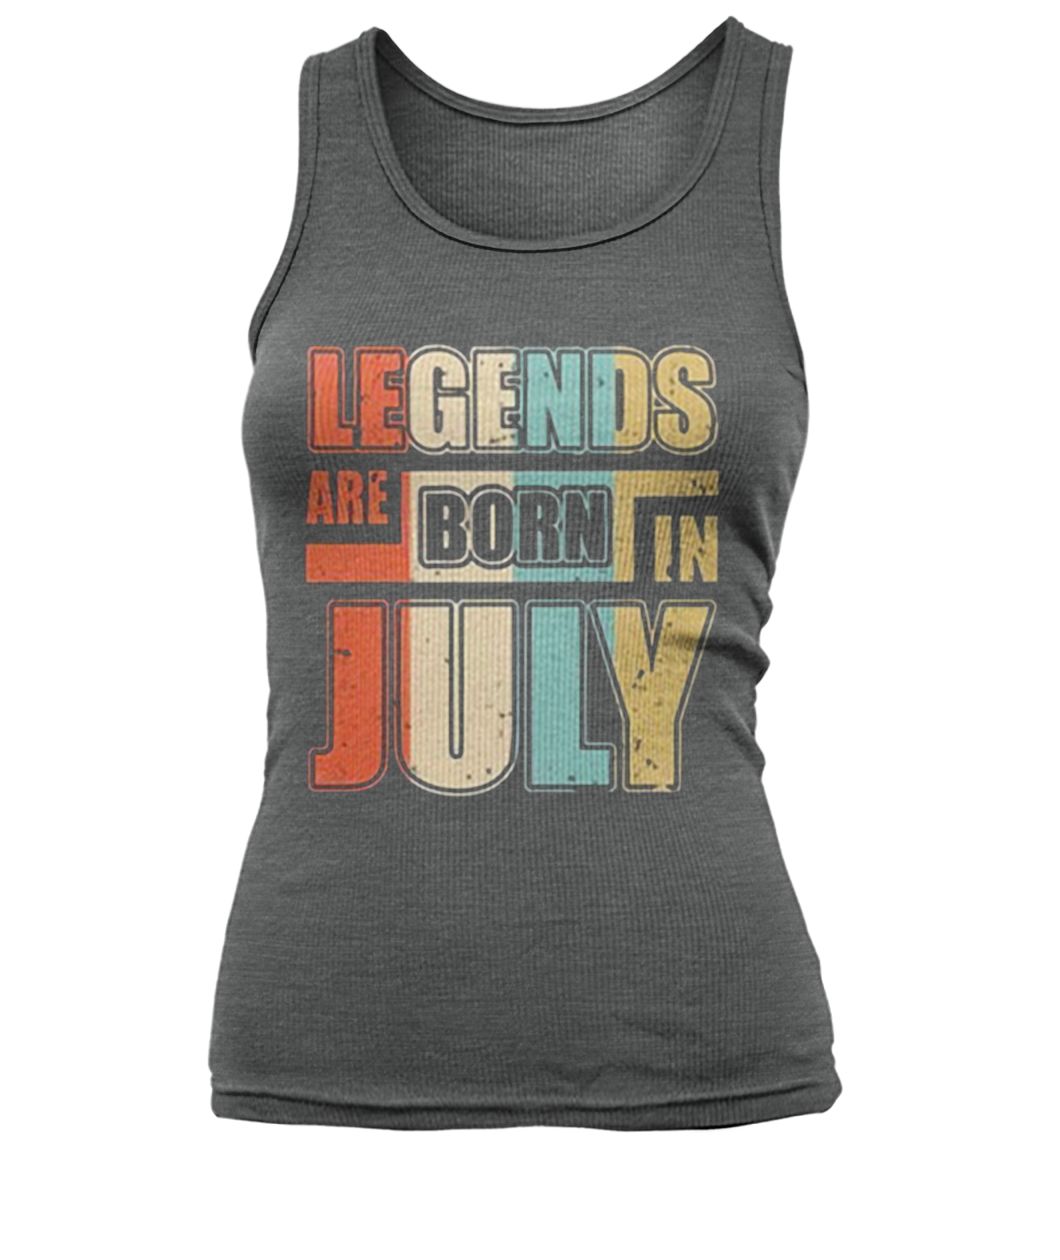 Vintage legends are born in july women's tank top